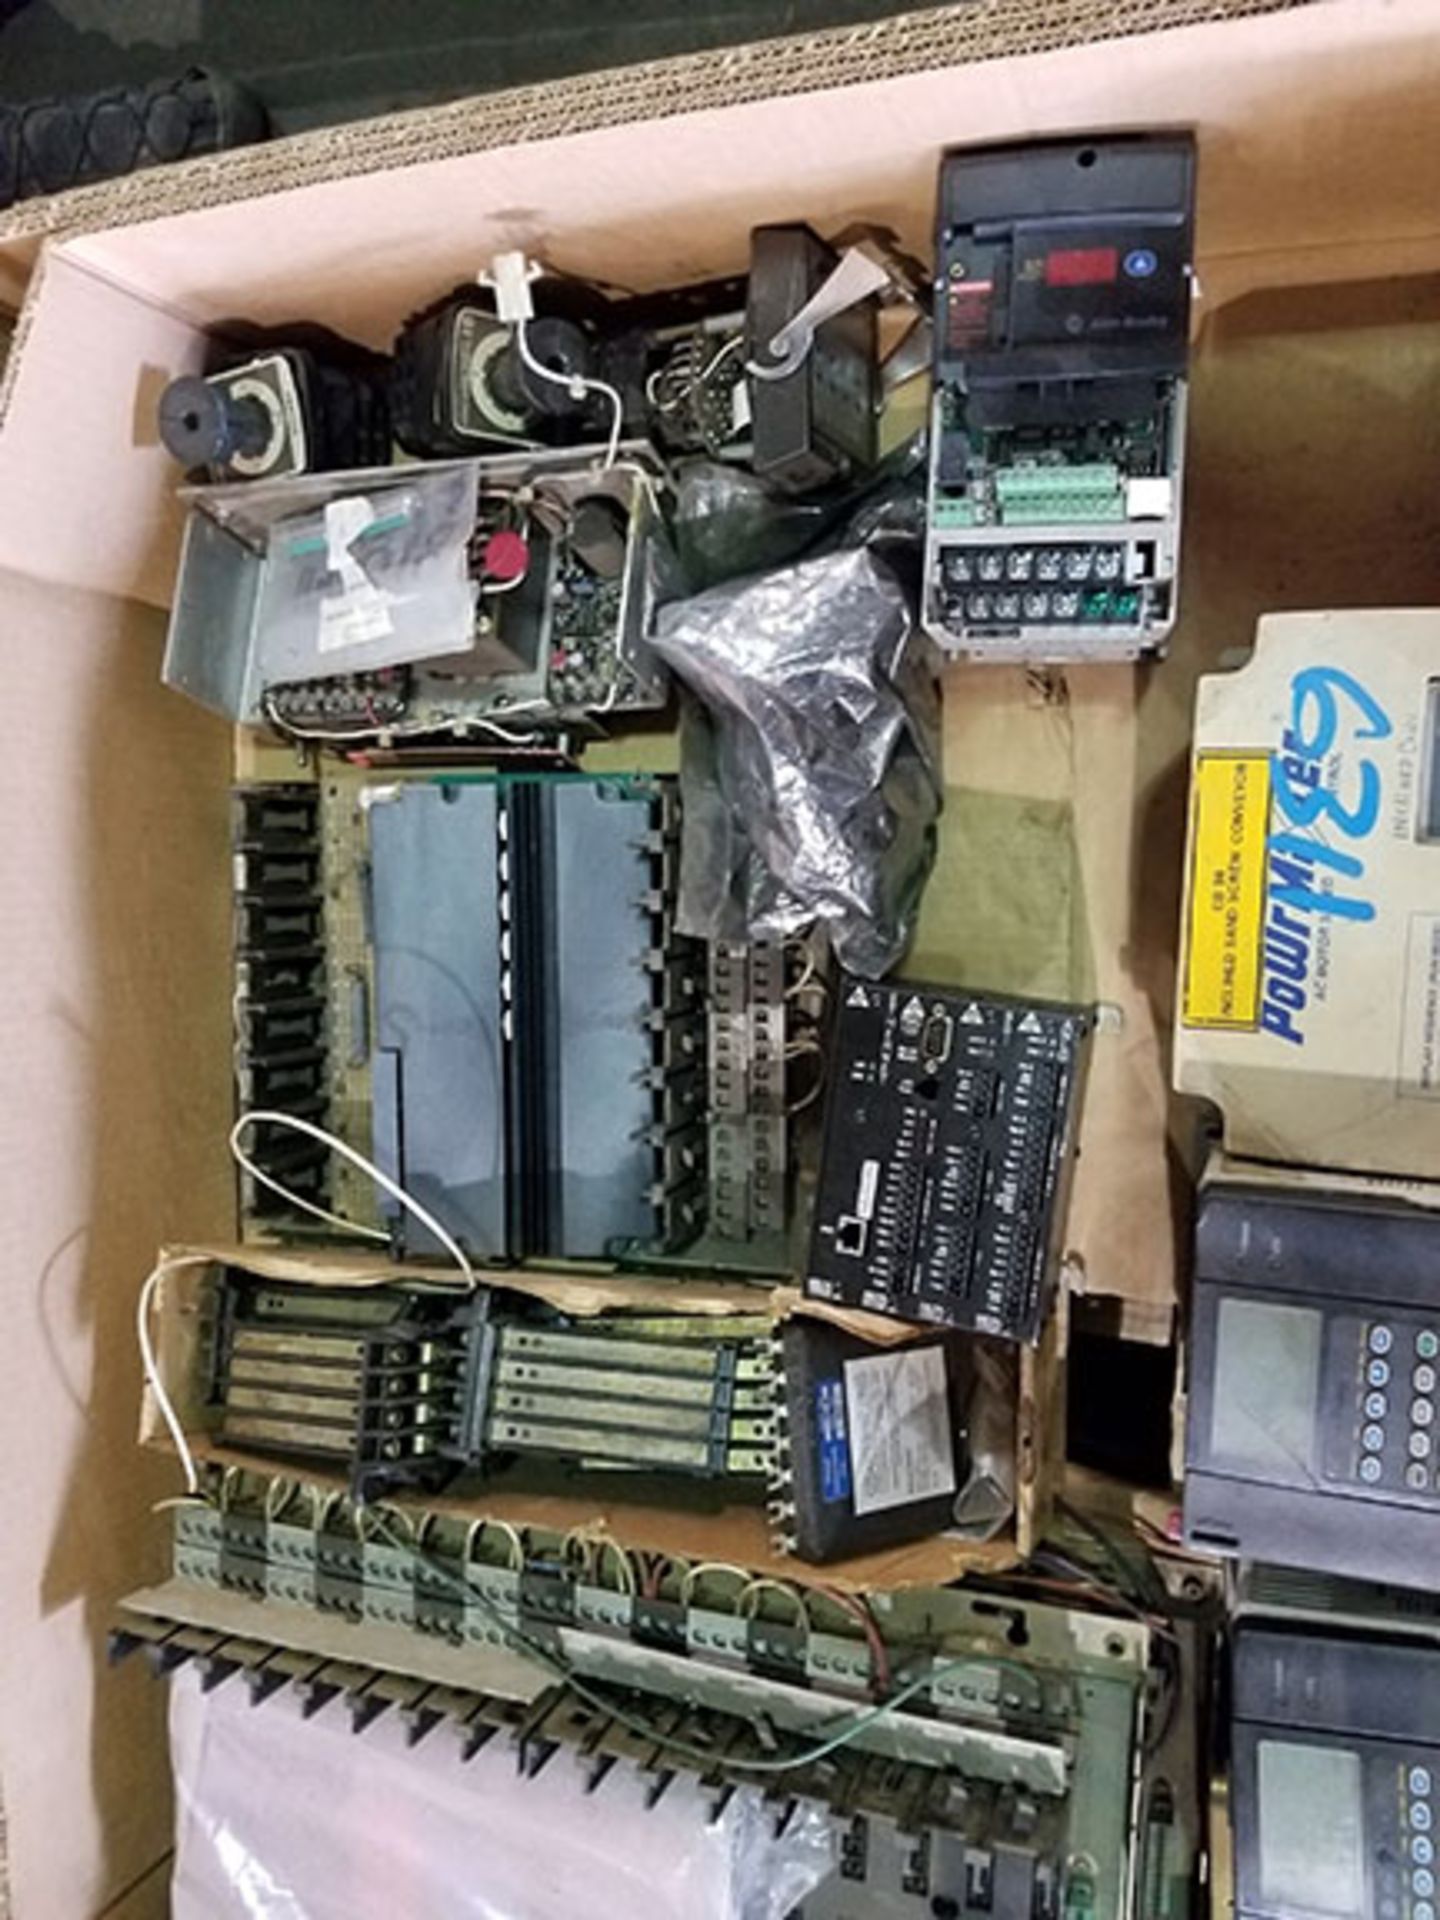 PALLET OF (2) AB POWERFLEX 700 VFD, AC MOTOR CONTROL, AND ASSORTED CONTROL ITEMS - Image 3 of 4